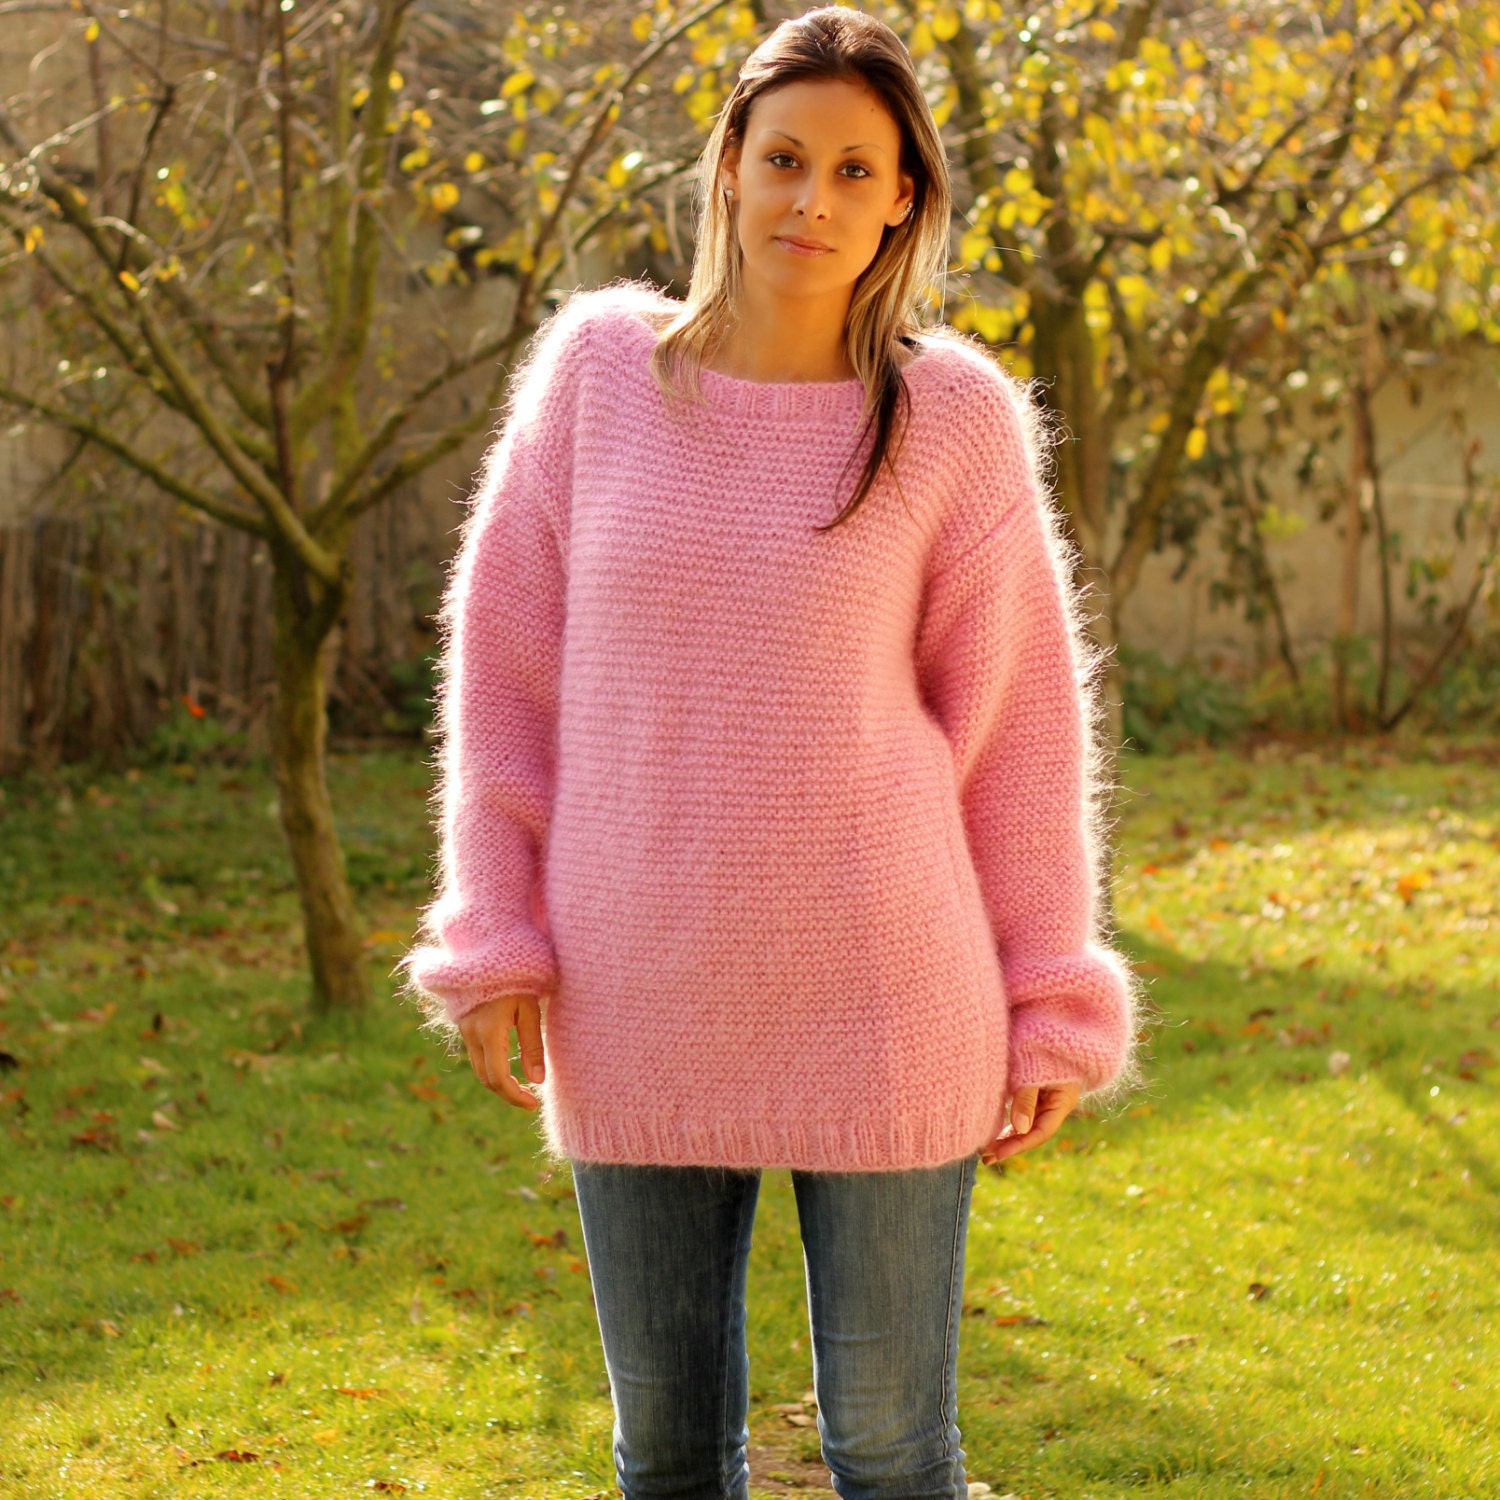 Hand Knitted Mohair Sweater Sweet PINK Fuzzy Crewneck Jumper - Etsy